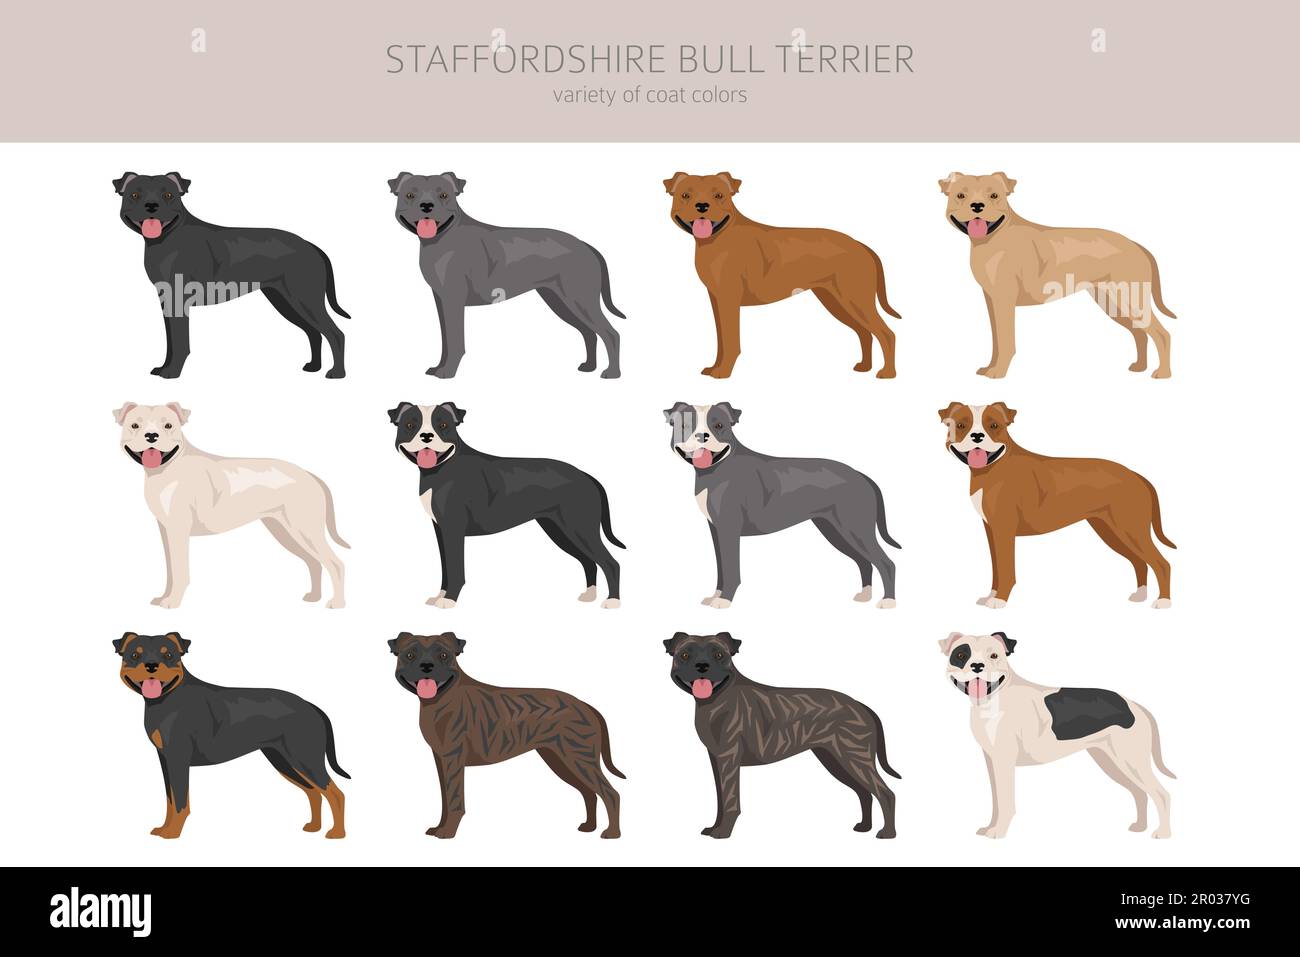 Staffordshire bull terrier. Different variaties of coat color bully ...